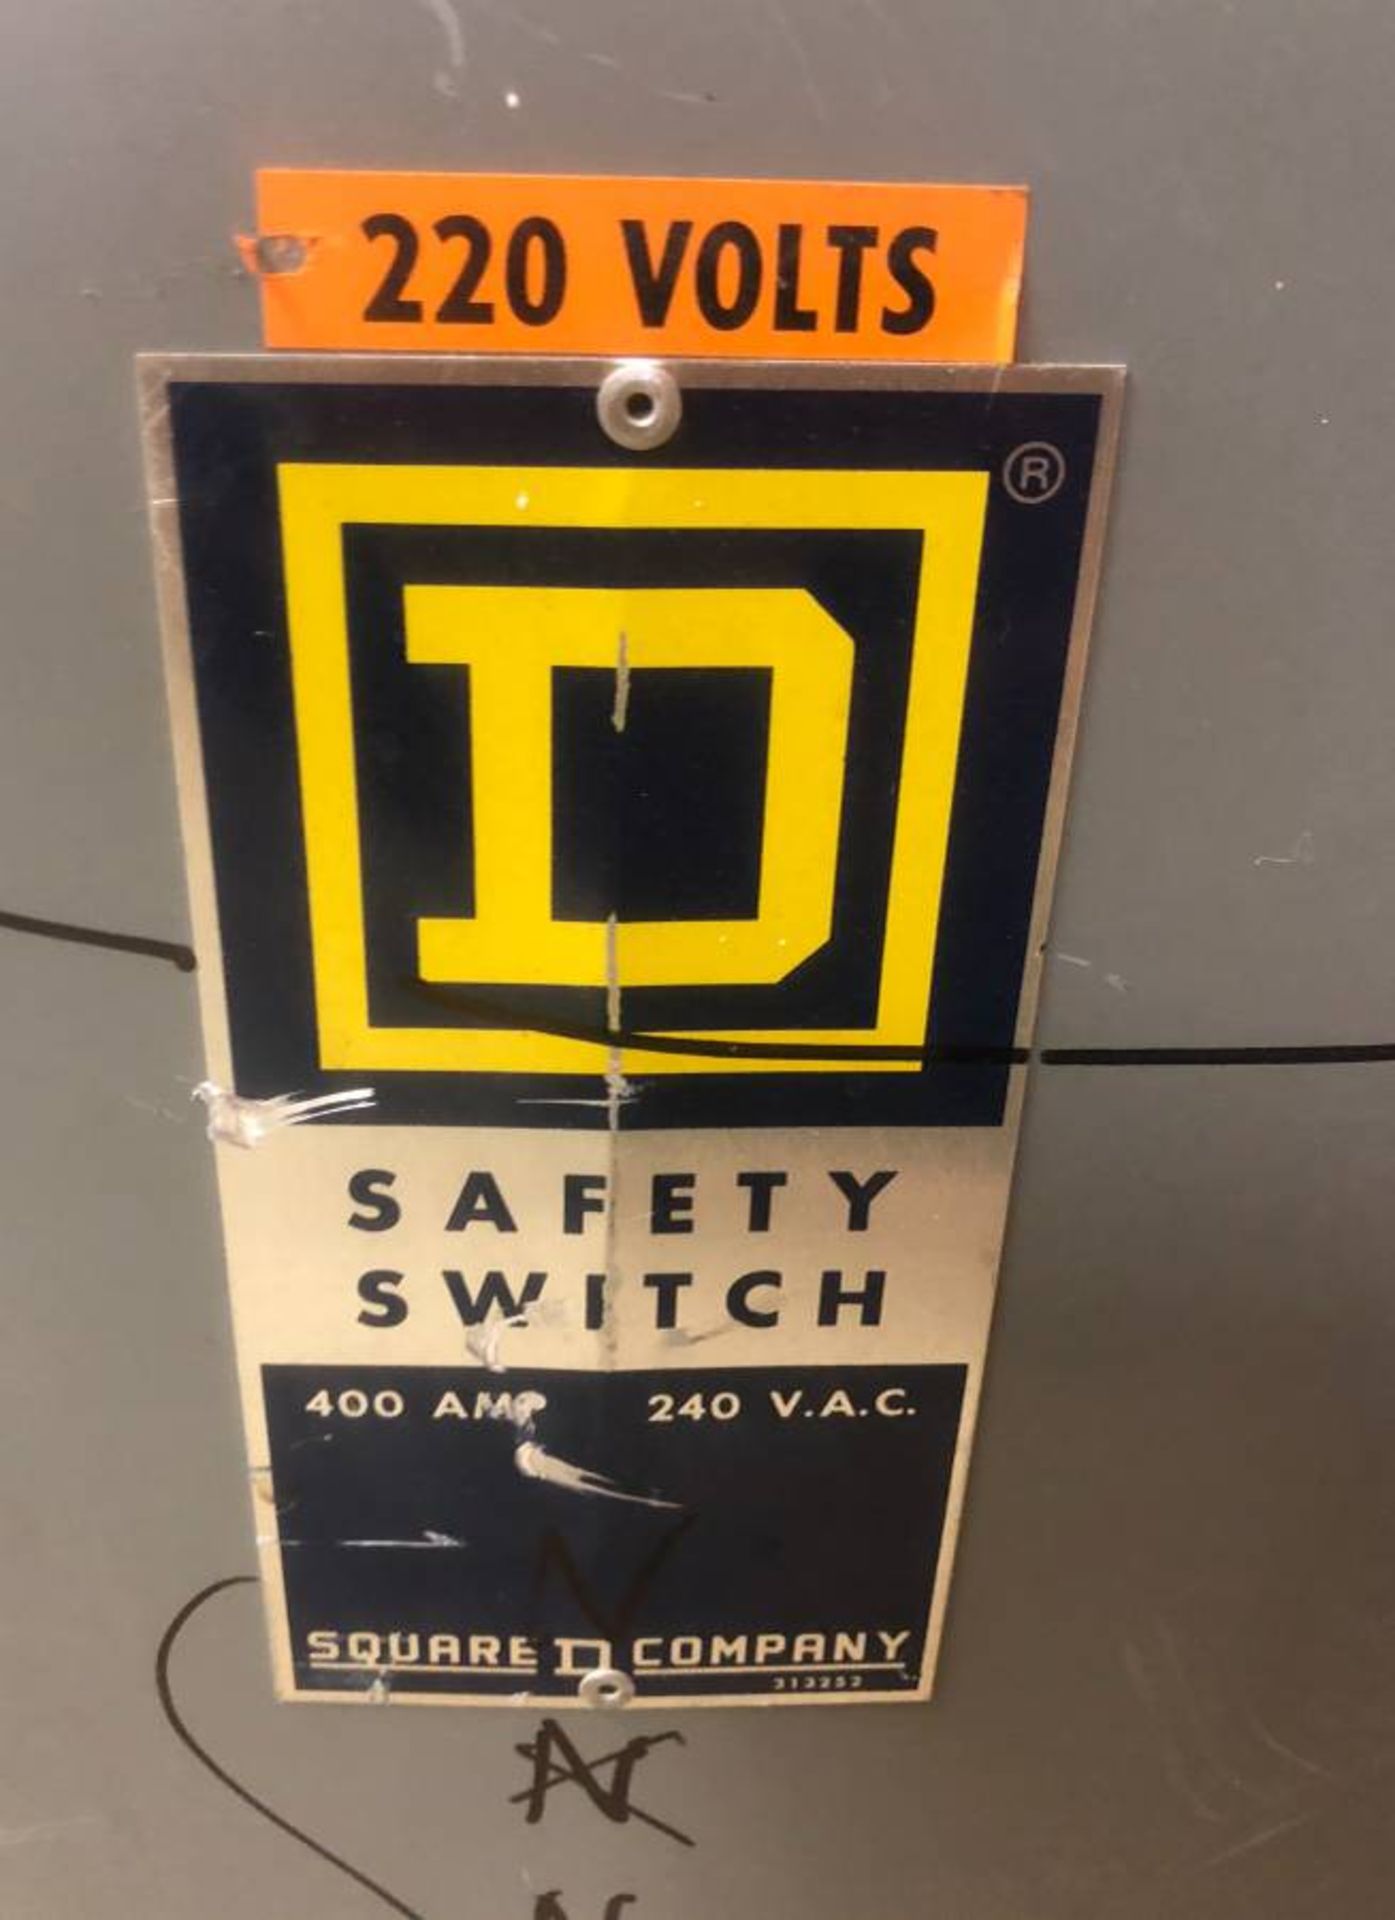 Square D D225N GD Safety Switch 400A 240V FUSIBLE $1400 unit   USED, UNSURE IF ANY PROBLEMS - Image 3 of 5